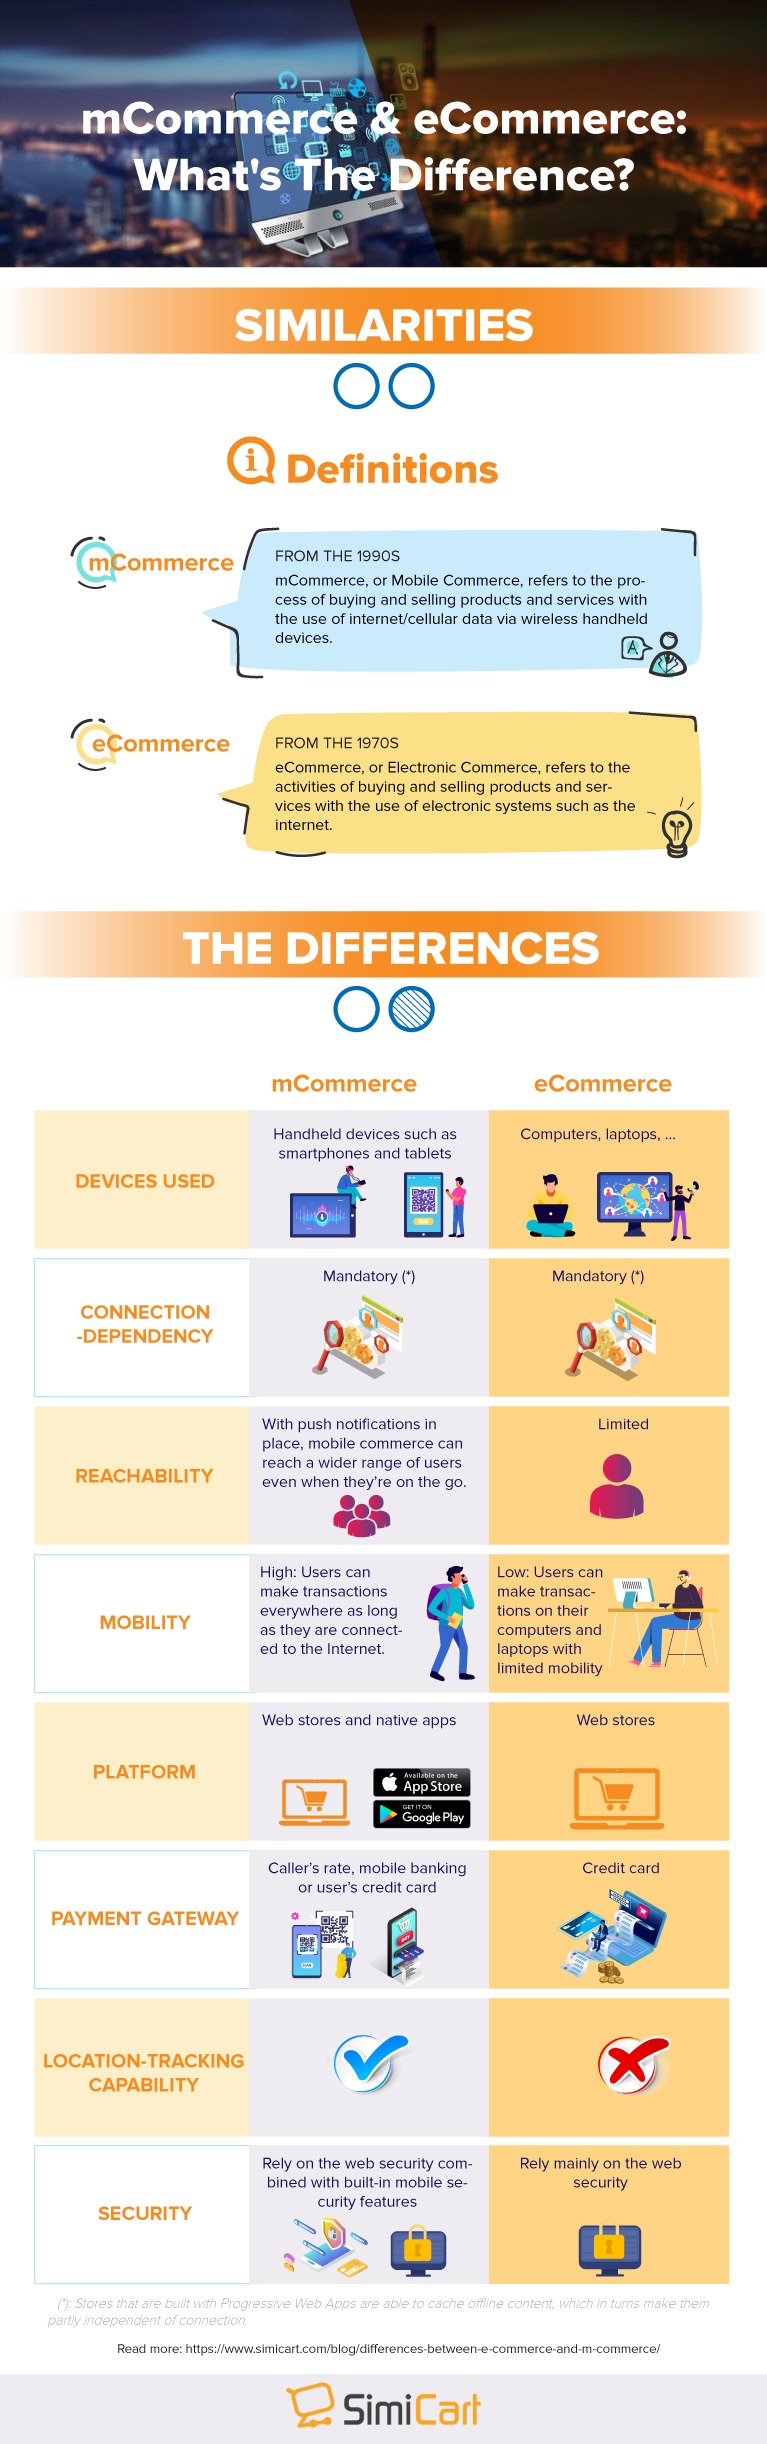 mcommerce vs ecommerce infographic by simicart.com